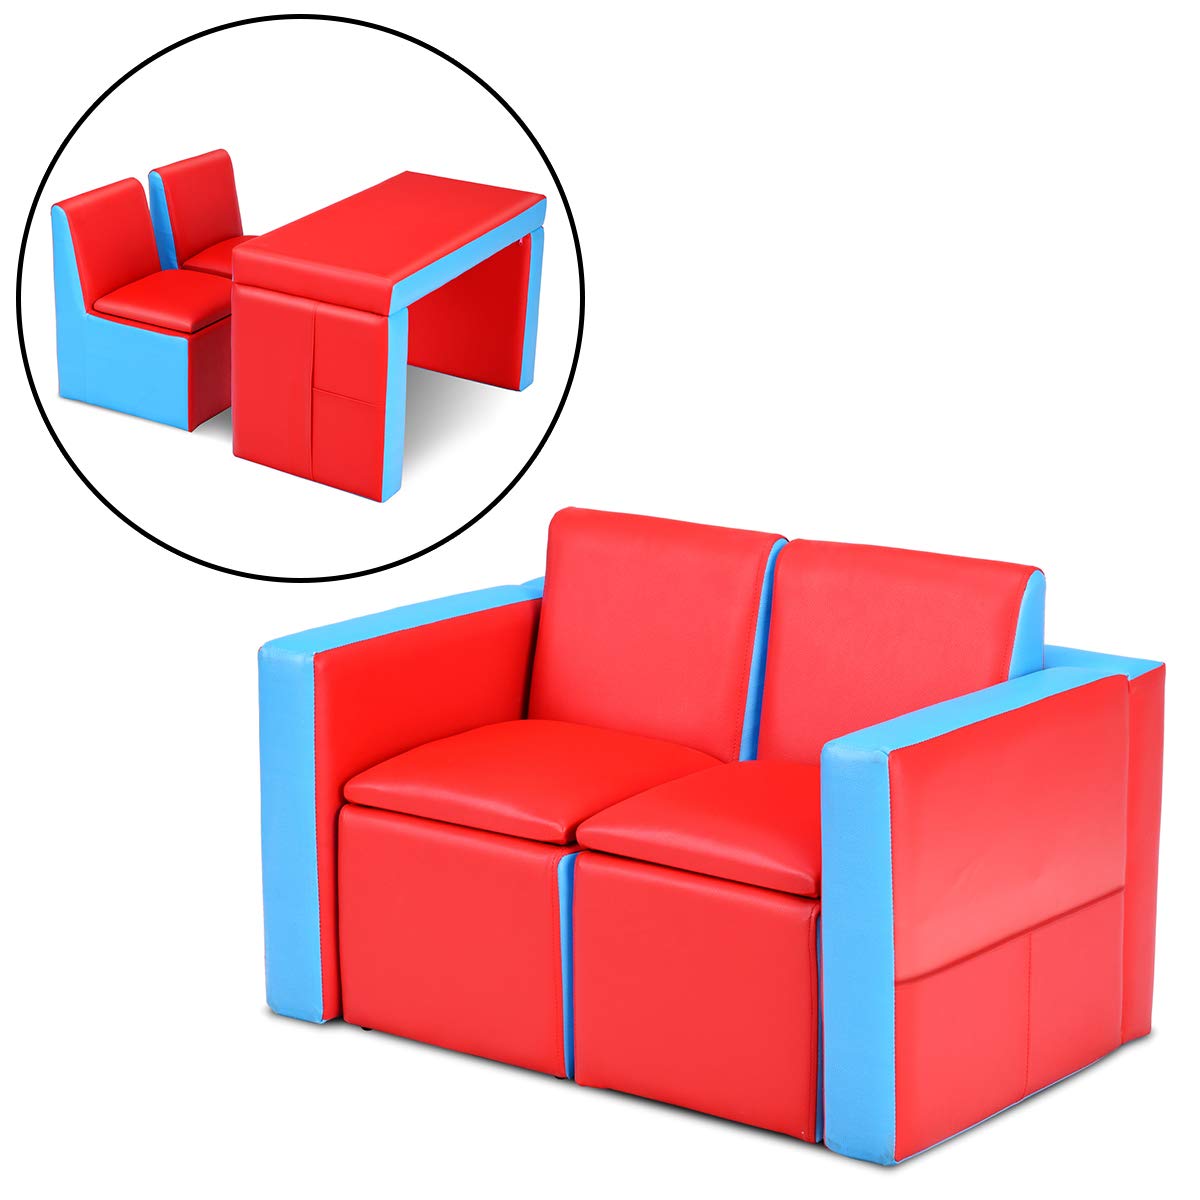 Costzon Kids Sofa, 2-in-1 Multi-Functional Kids Table & Chair Set, 2 Seat Couch with Storage Box for Boys & Girls